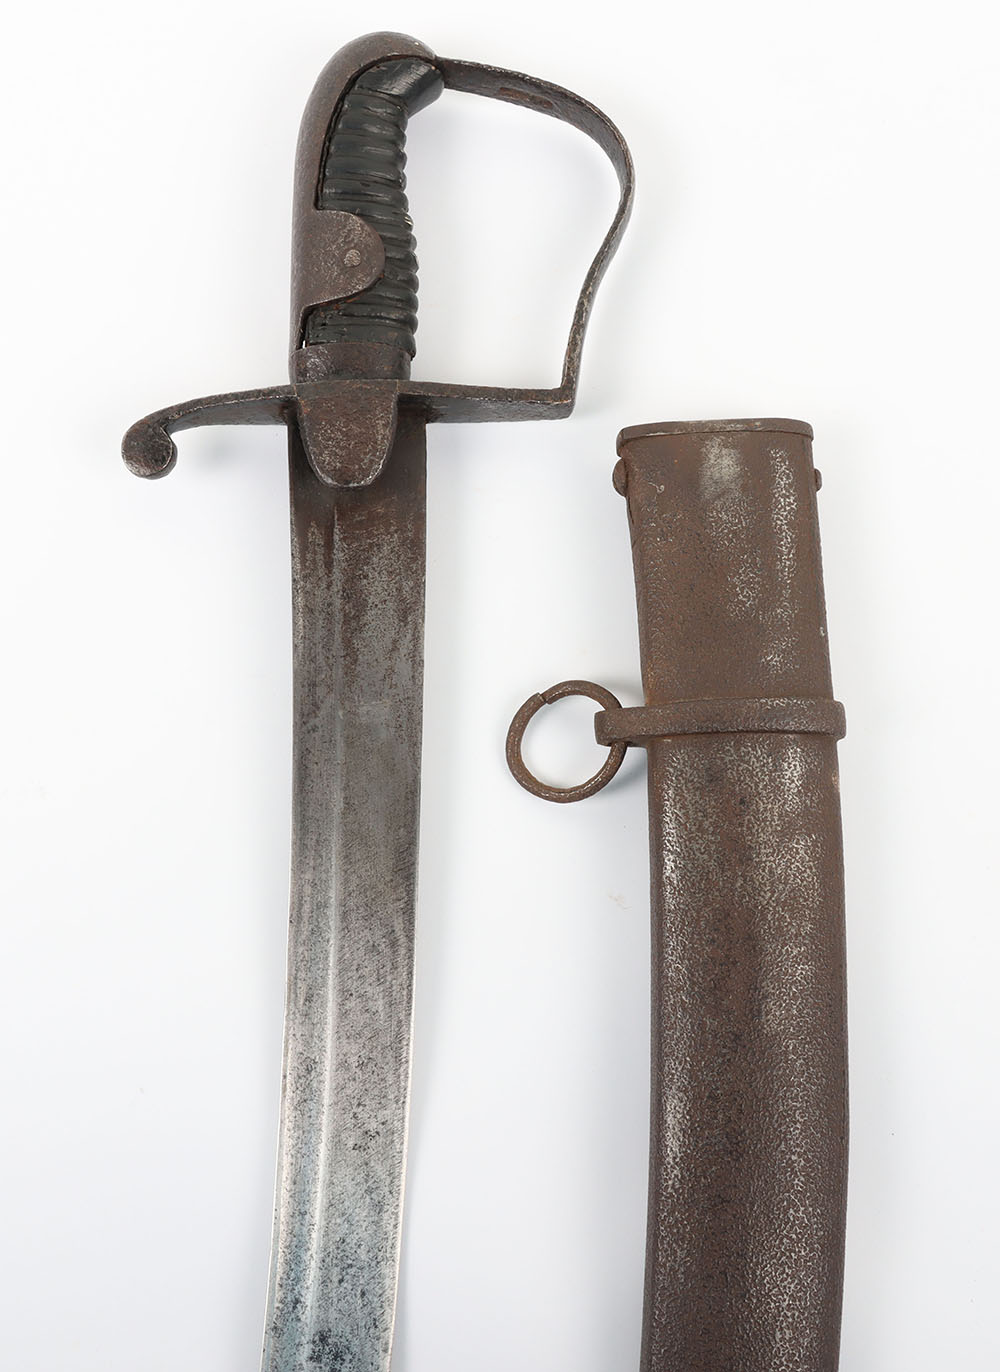 Interesting 1796 Pattern Cavalry Troopers Sword with History Relating to the Major Rogers Rocket Bat - Image 2 of 7